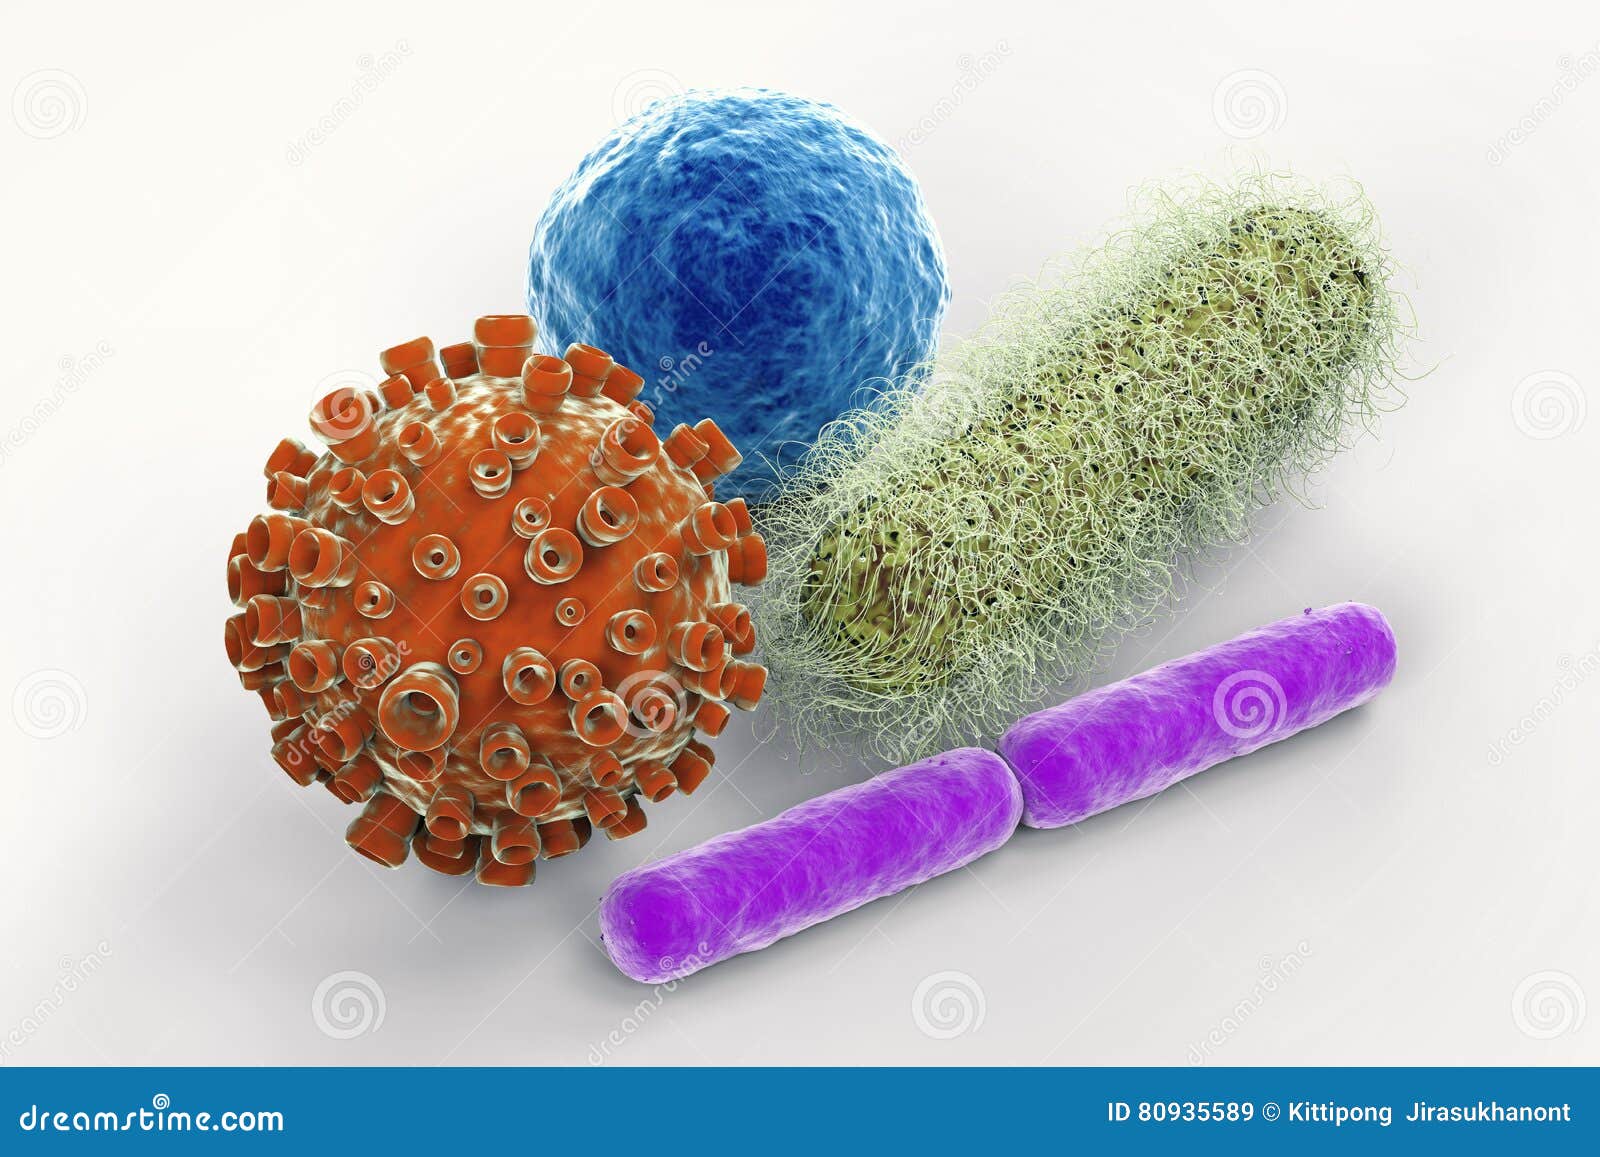 virus and bacteria cells